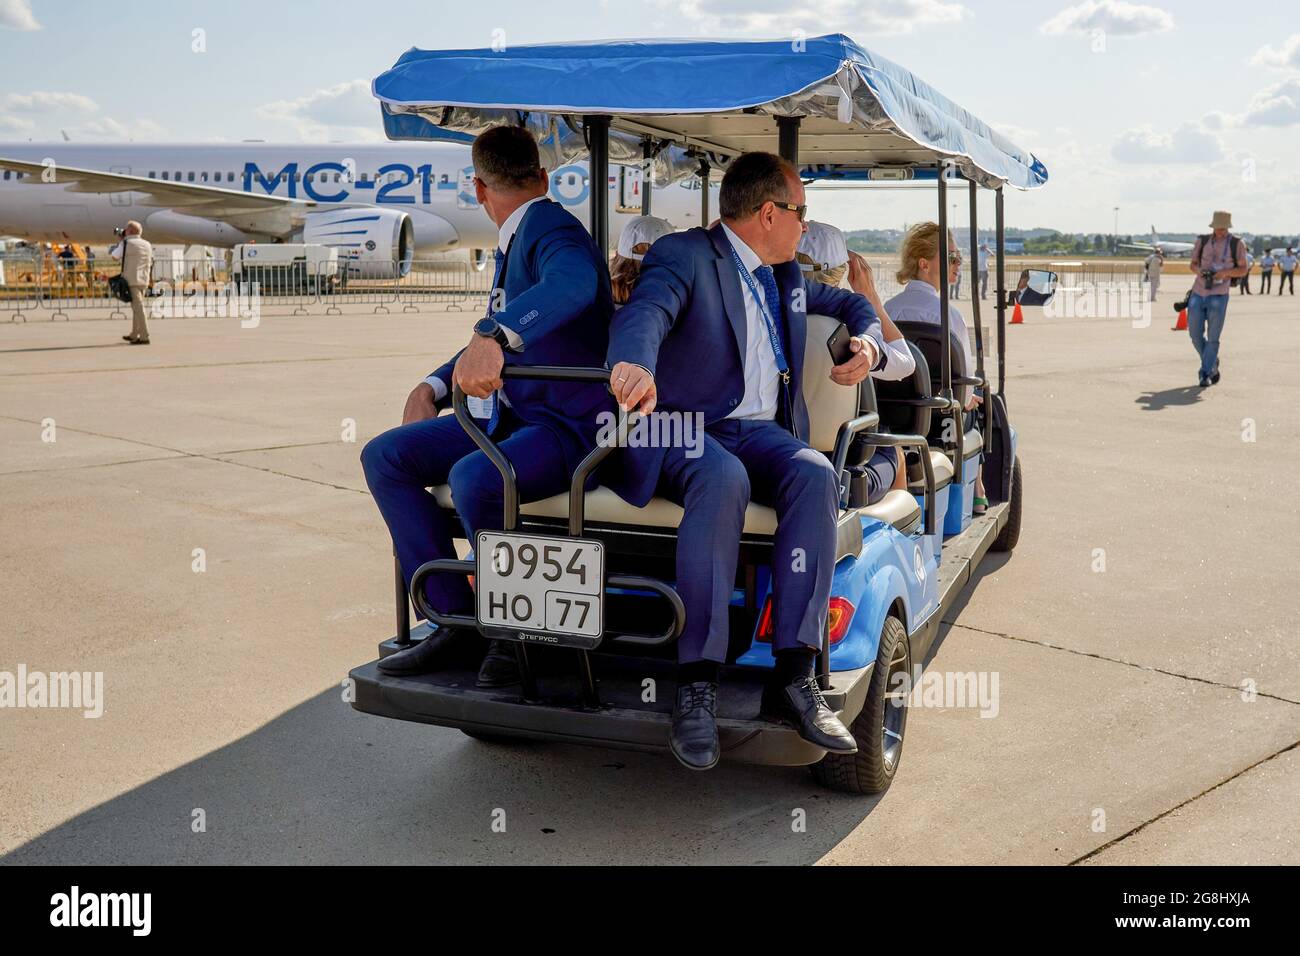 Zhukovsky, Russia. 20th July, 2021. Visitors on an electric vehicle during the work of the XV International Aviation and Space Salon MAKS-2021 that was opened by the President of the Russian Federation, Vladimir Putin. MAKS (International Air and Space Salon) is a biennial international air show held at Zhukovsky International Airport and is a traditional marketplace for Russian defence and commercial aerospace industry. (Photo by Mihail Siergiejevicz/SOPA Imag/Sipa USA) Credit: Sipa USA/Alamy Live News Stock Photo